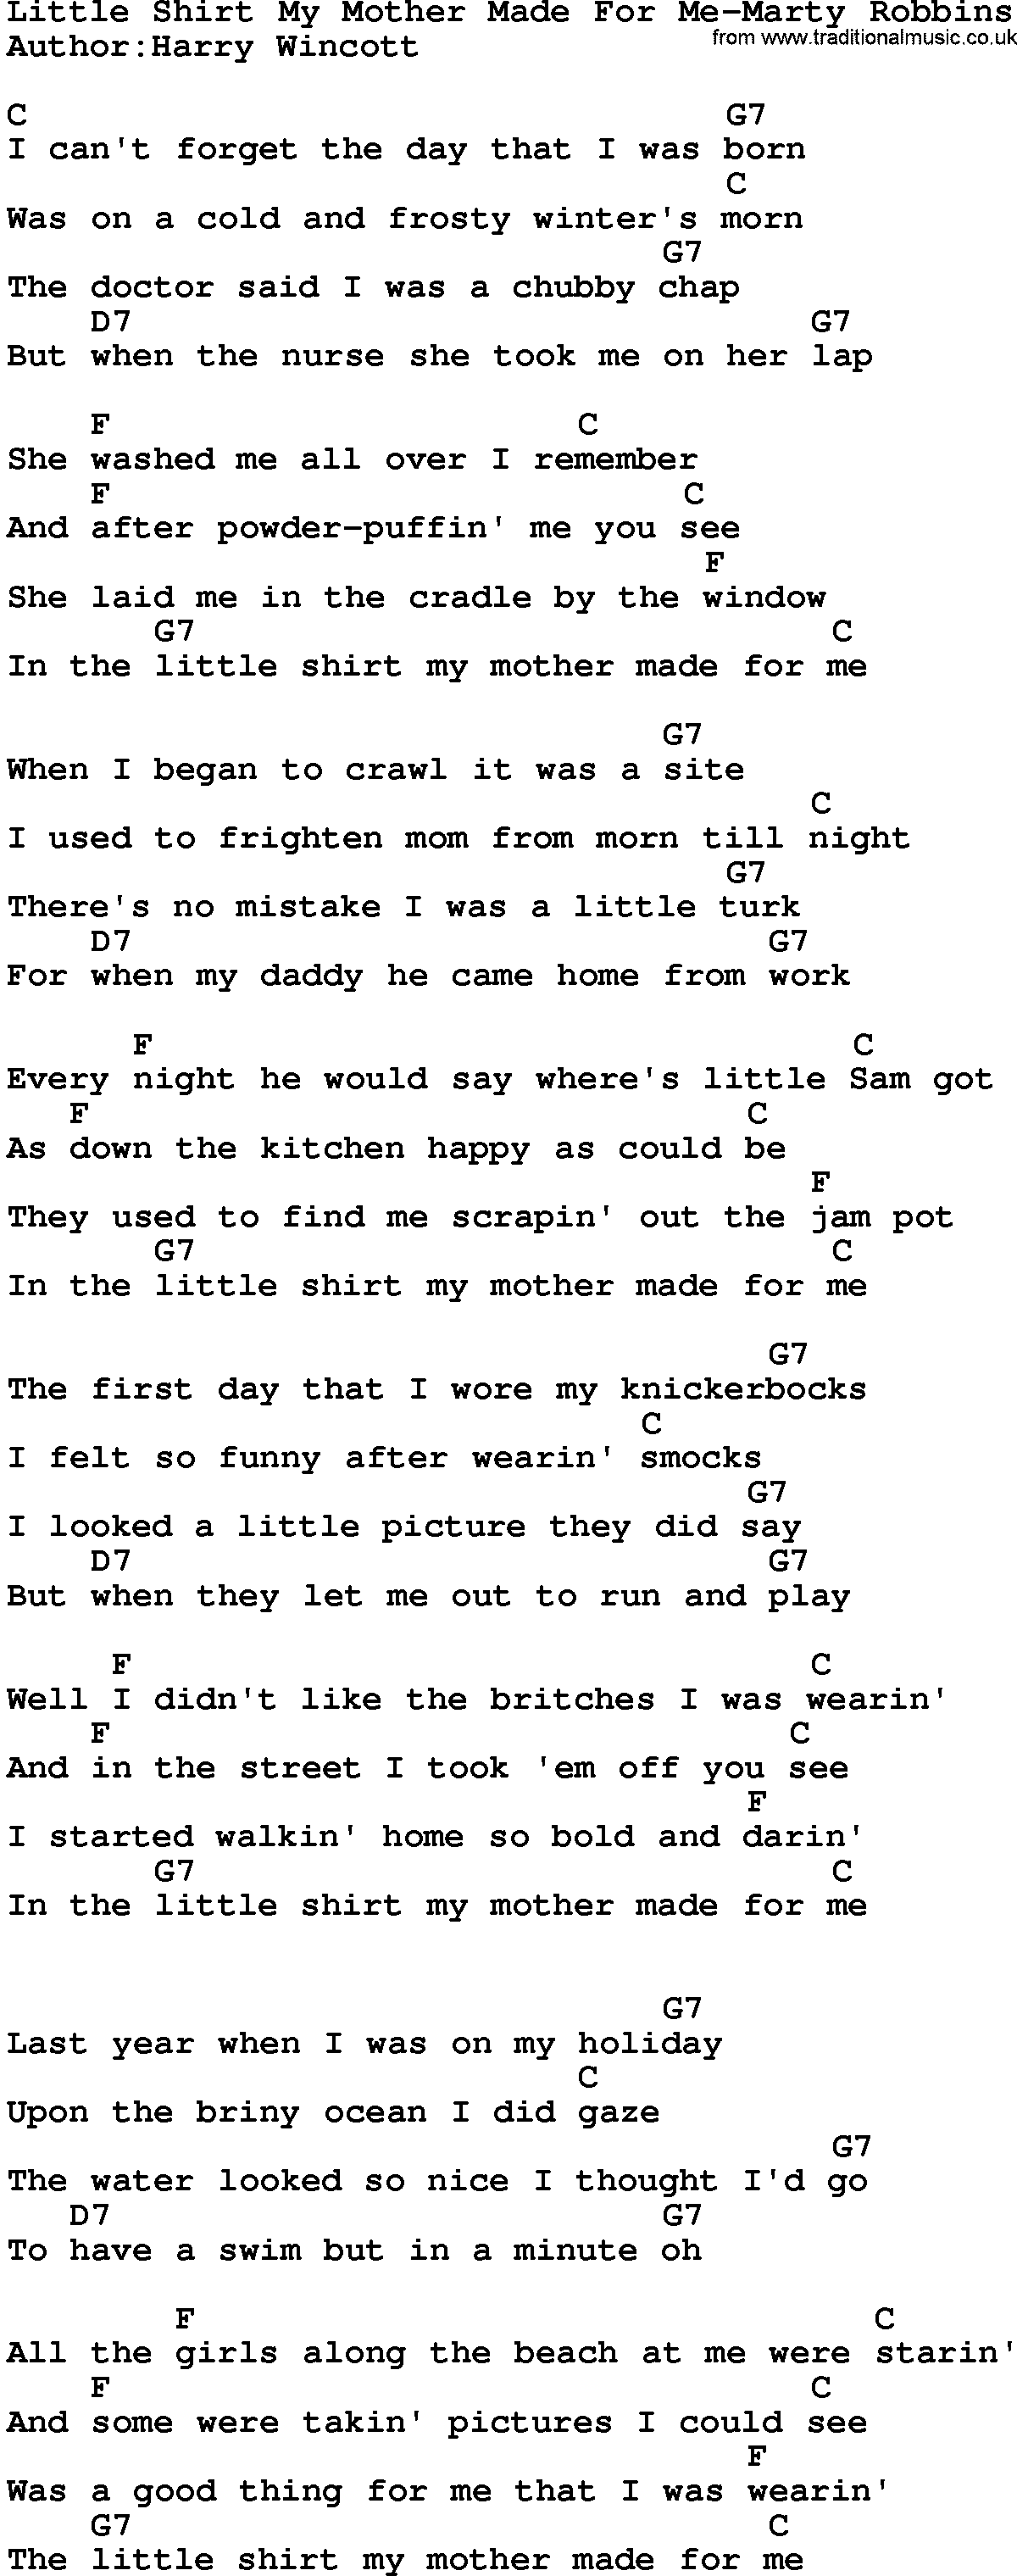 Country music song: Little Shirt My Mother Made For Me-Marty Robbins lyrics and chords